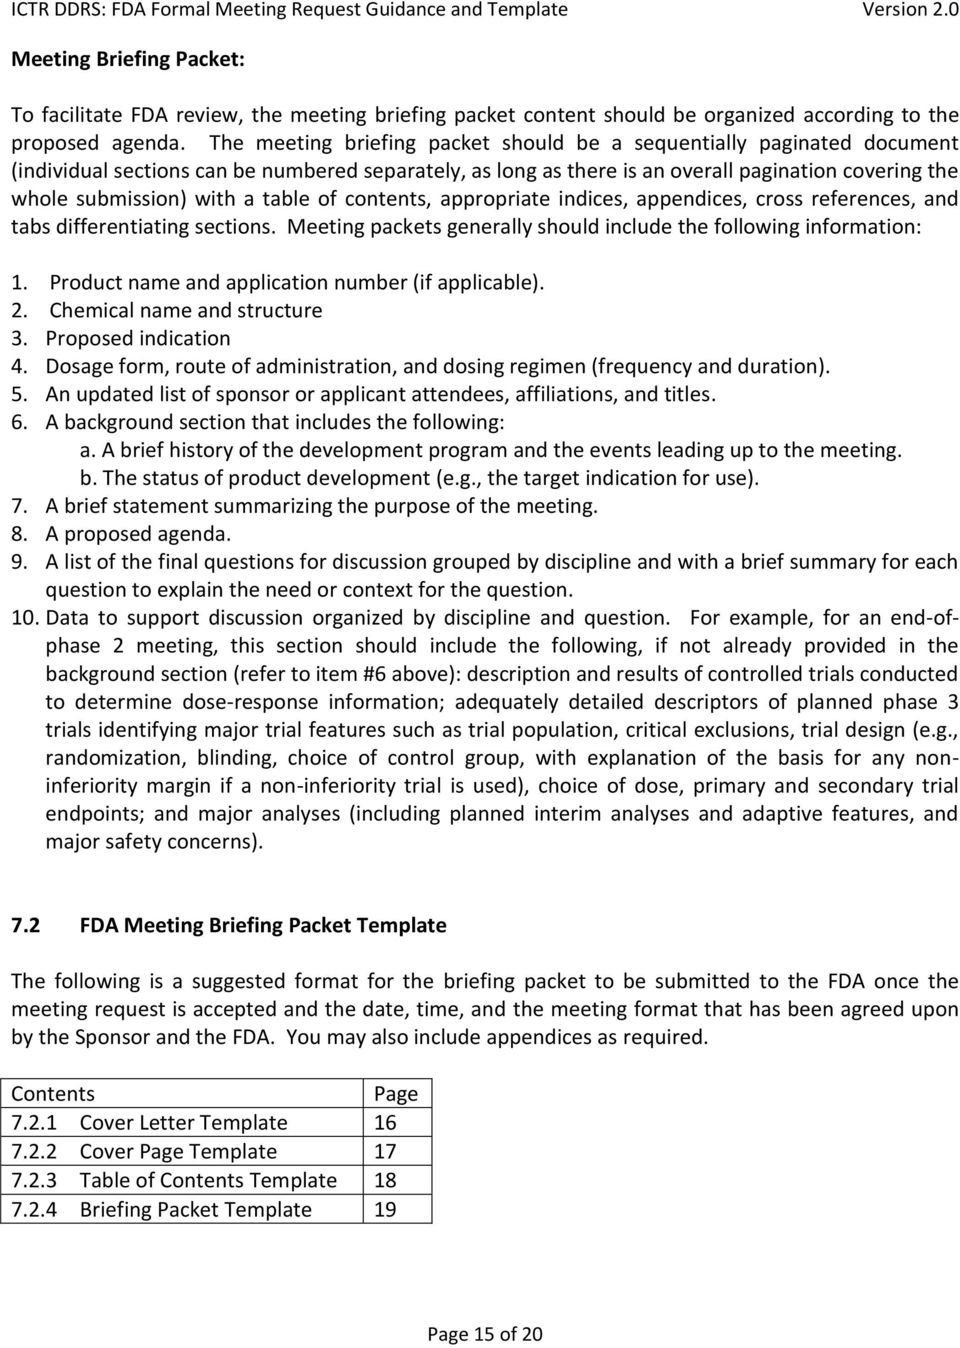 Formal Fda Meeting Request Guidance And Template Pdf Free in dimensions 960 X 1348